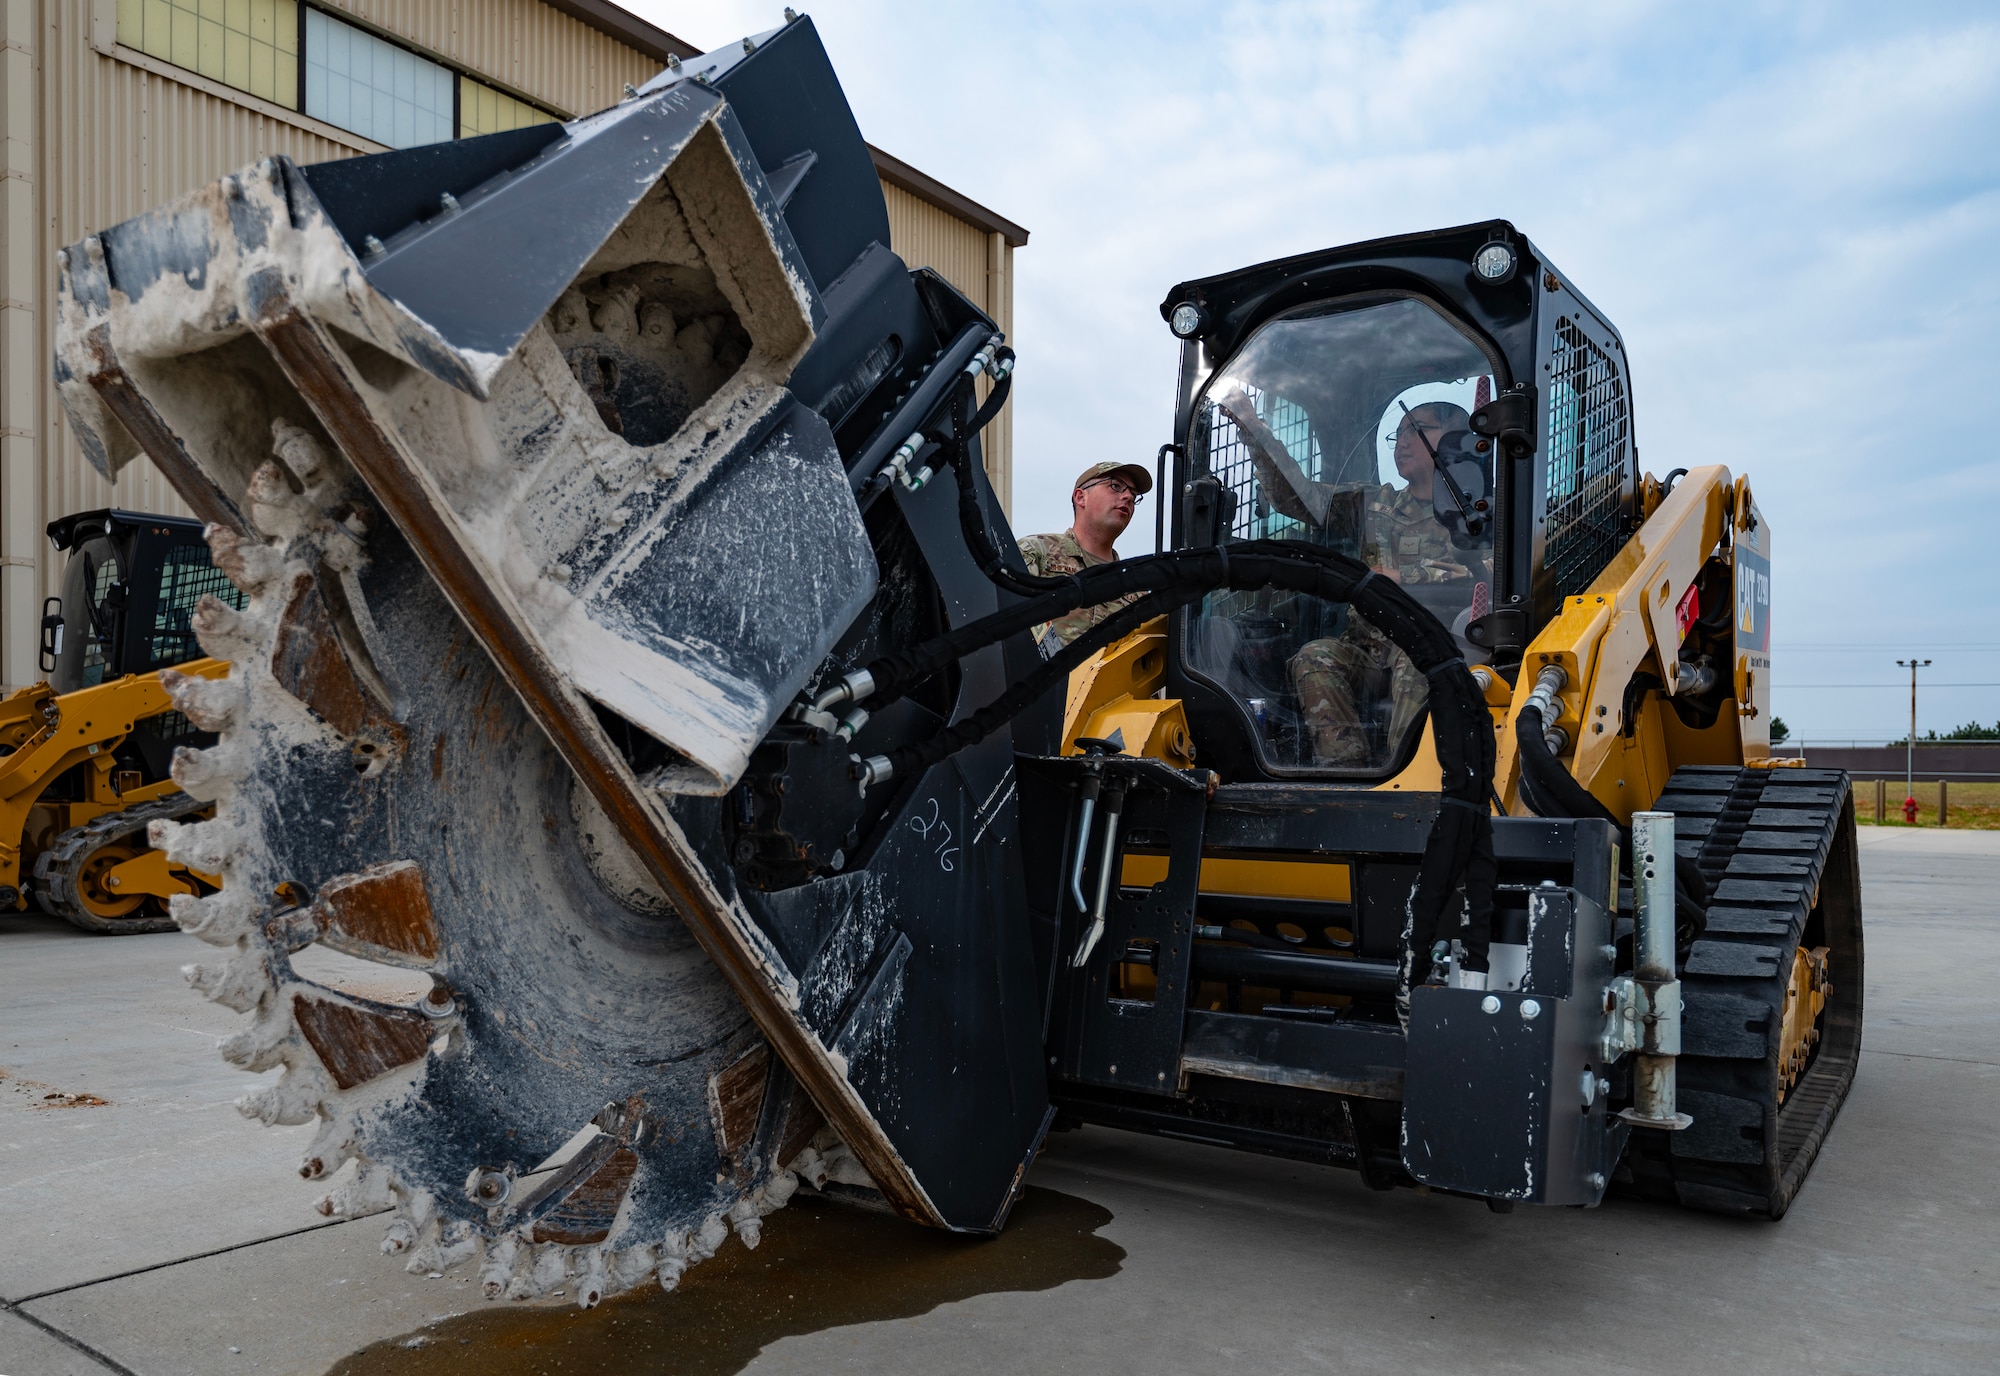 Airman instructs another Airman on procedures to operate a compact track loader during a Prime Base Engineer Emergency Force or “Prime BEEF” training at Kunsan Air Base,